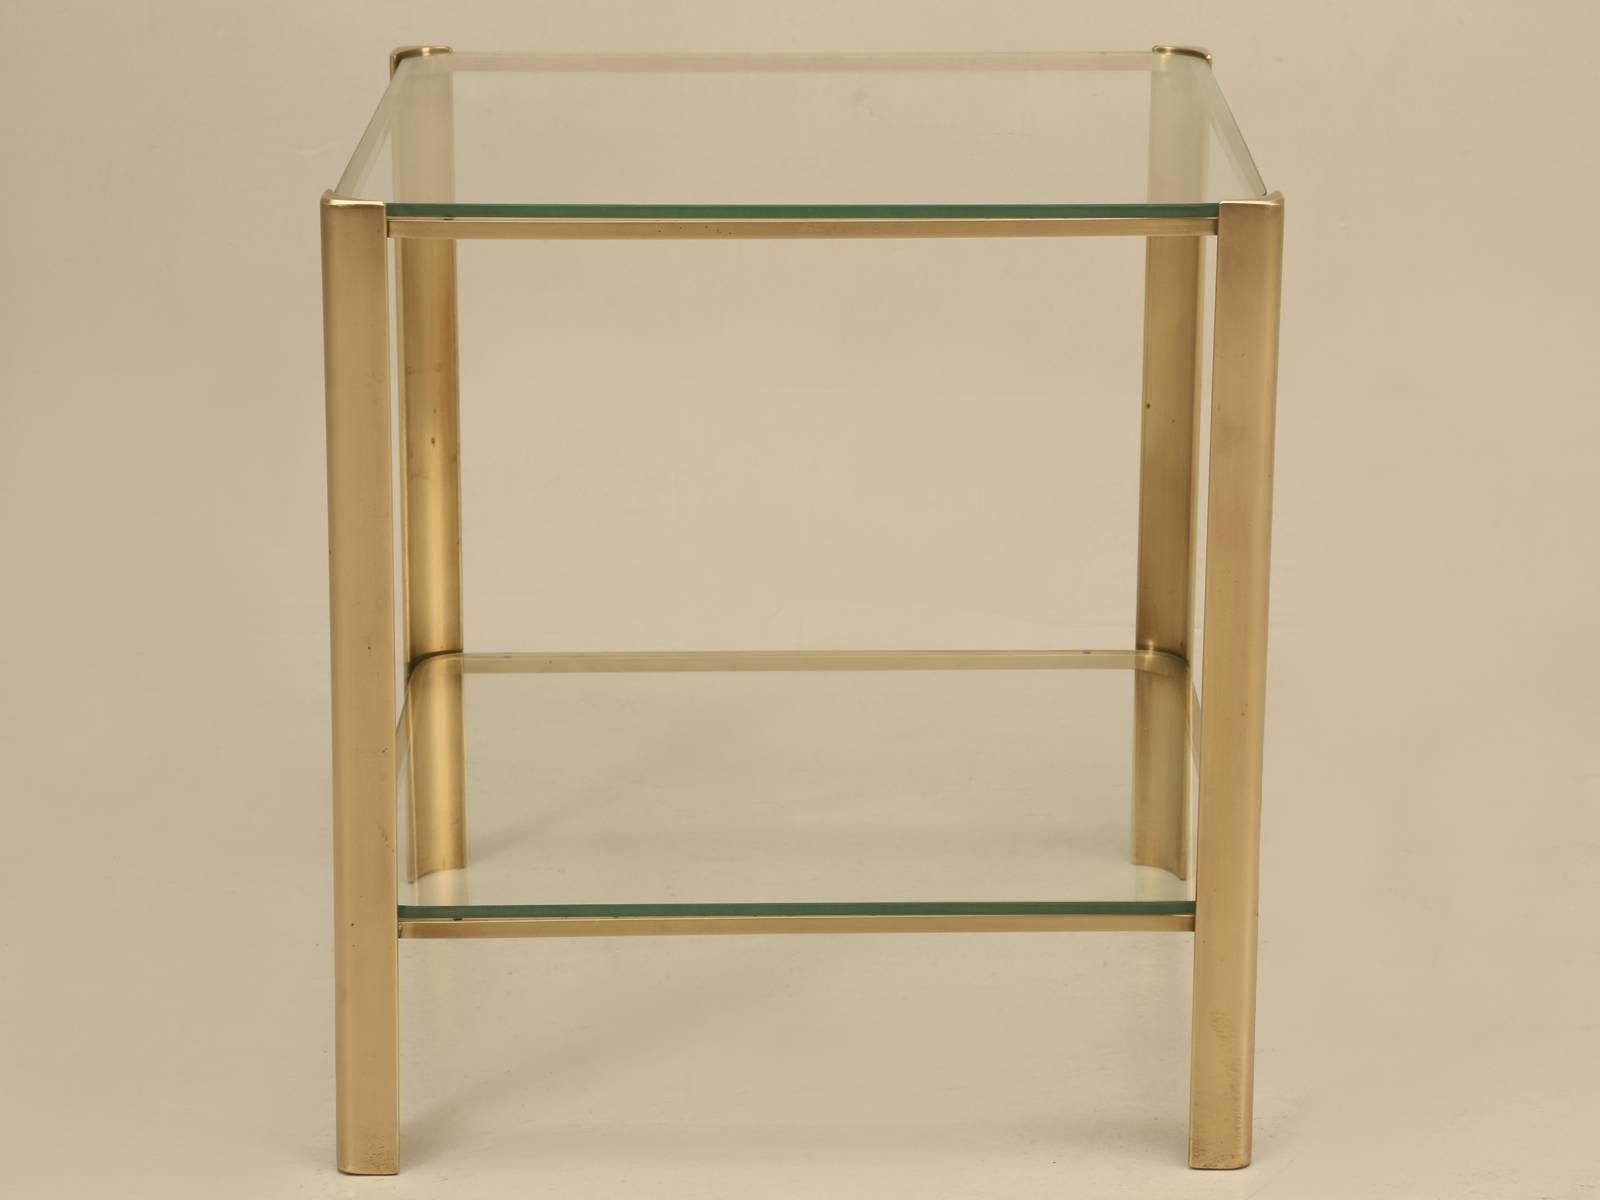 French Mid-Century Modern solid bronze end table with glass top, in a design that I have never seen before. Beautifully executed and there are no prior repairs. Generally, small end or side tables like this, would be made from brass, so to find a